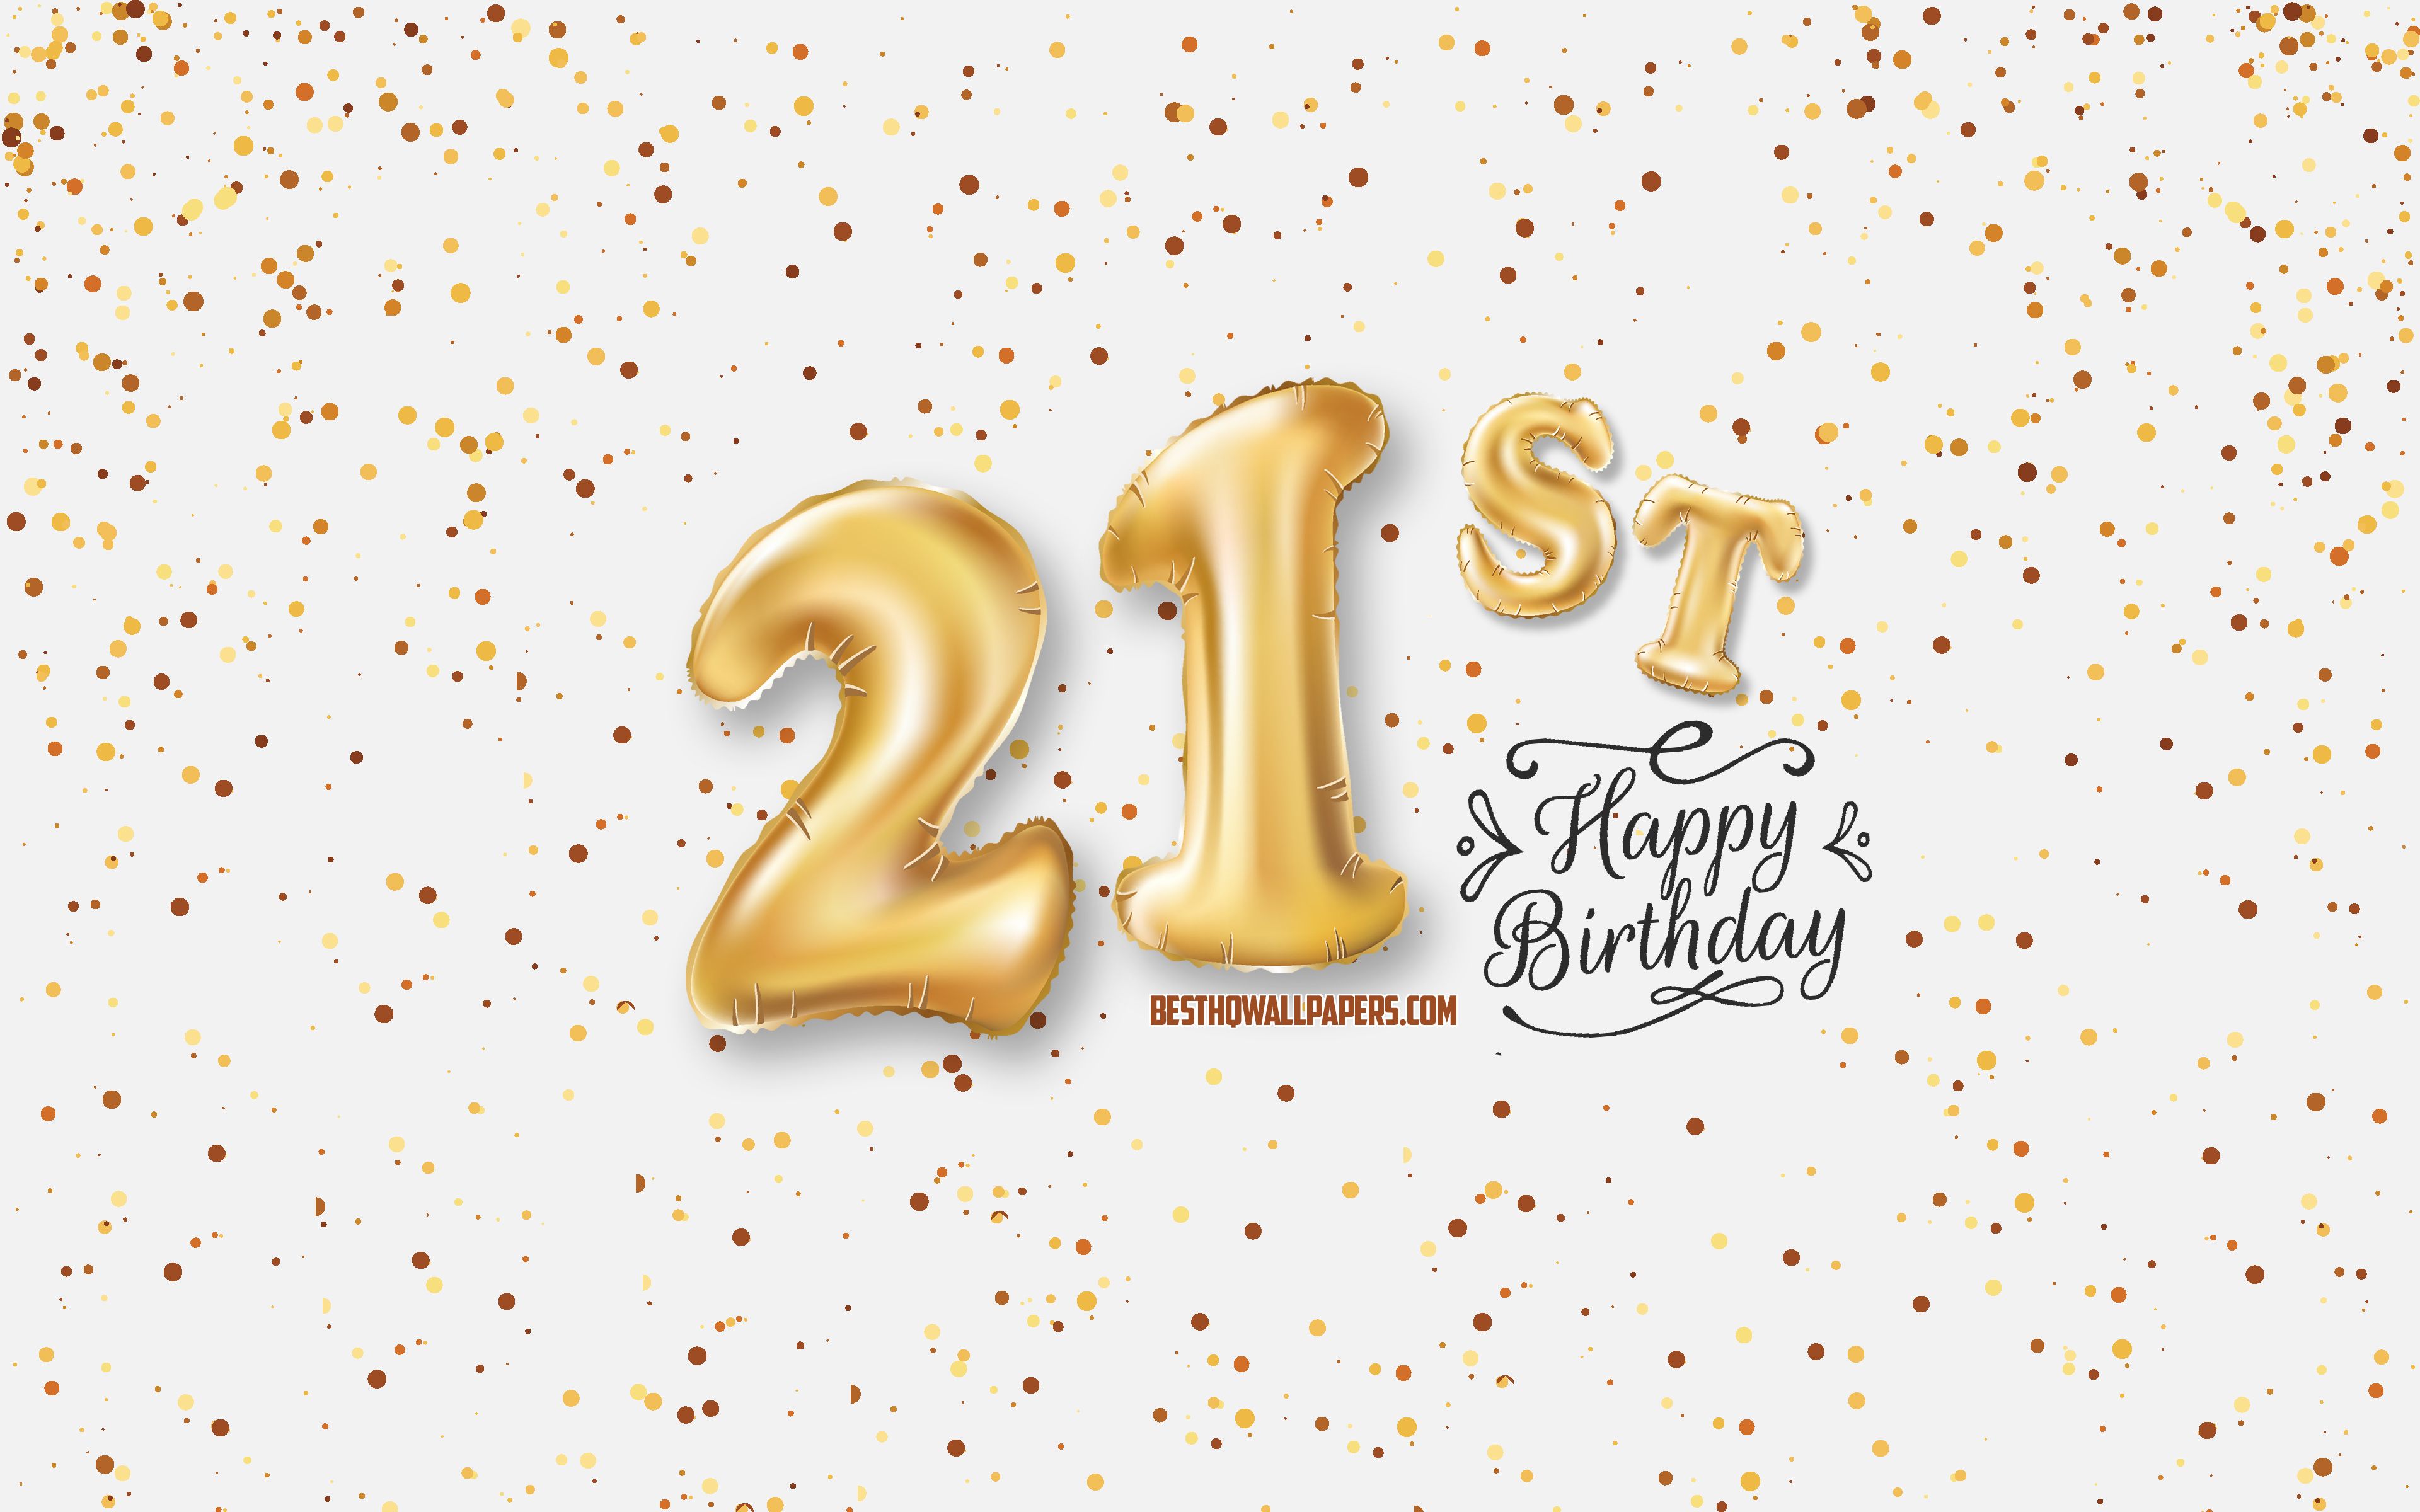 Download wallpaper 21st Happy Birthday, 3D balloons letters, Birthday background with balloons, 21 Years Birthday, Happy 21st Birthday, white background, Happy Birthday, greeting card, Happy 21 Years Birthday for desktop with resolution